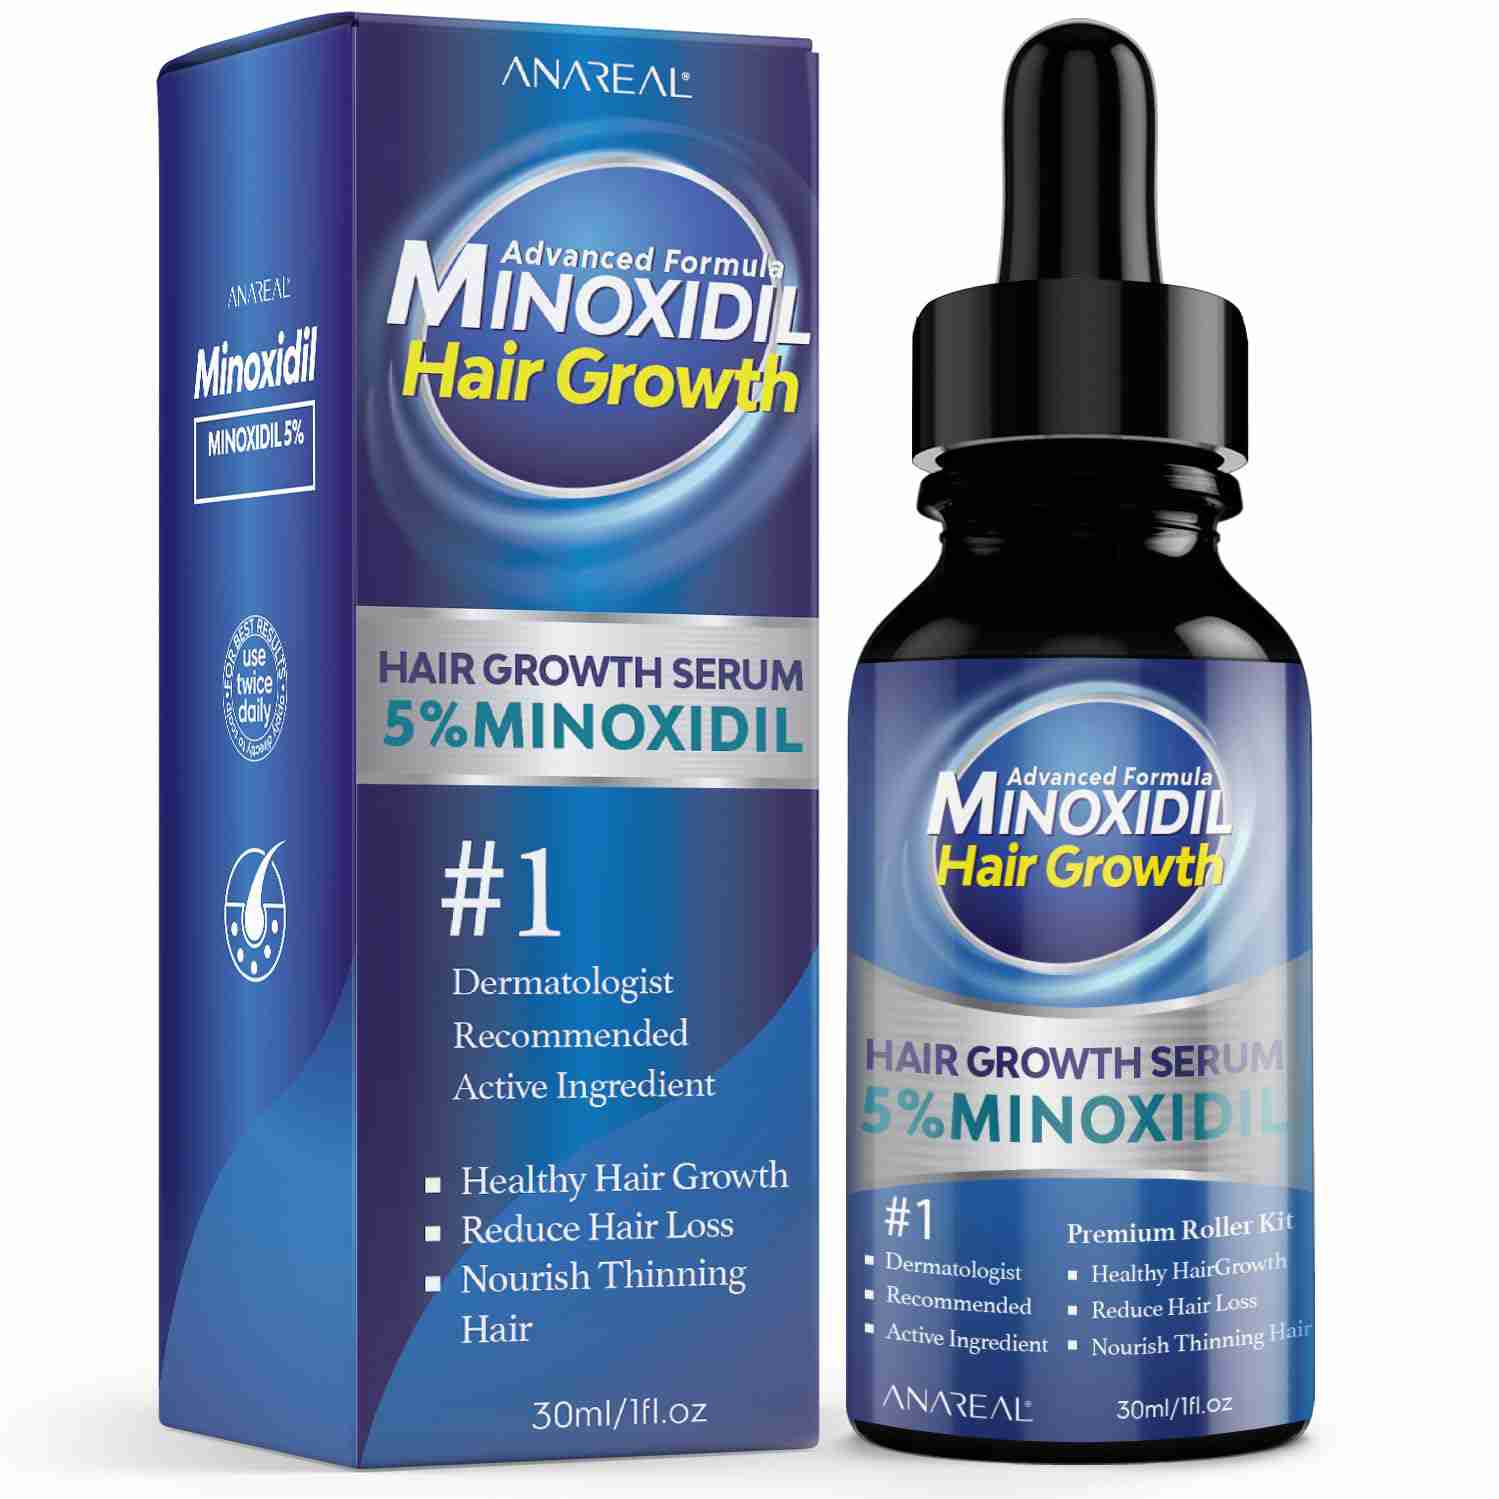 minoxidil-for-men-hair-growth with cash back rebate